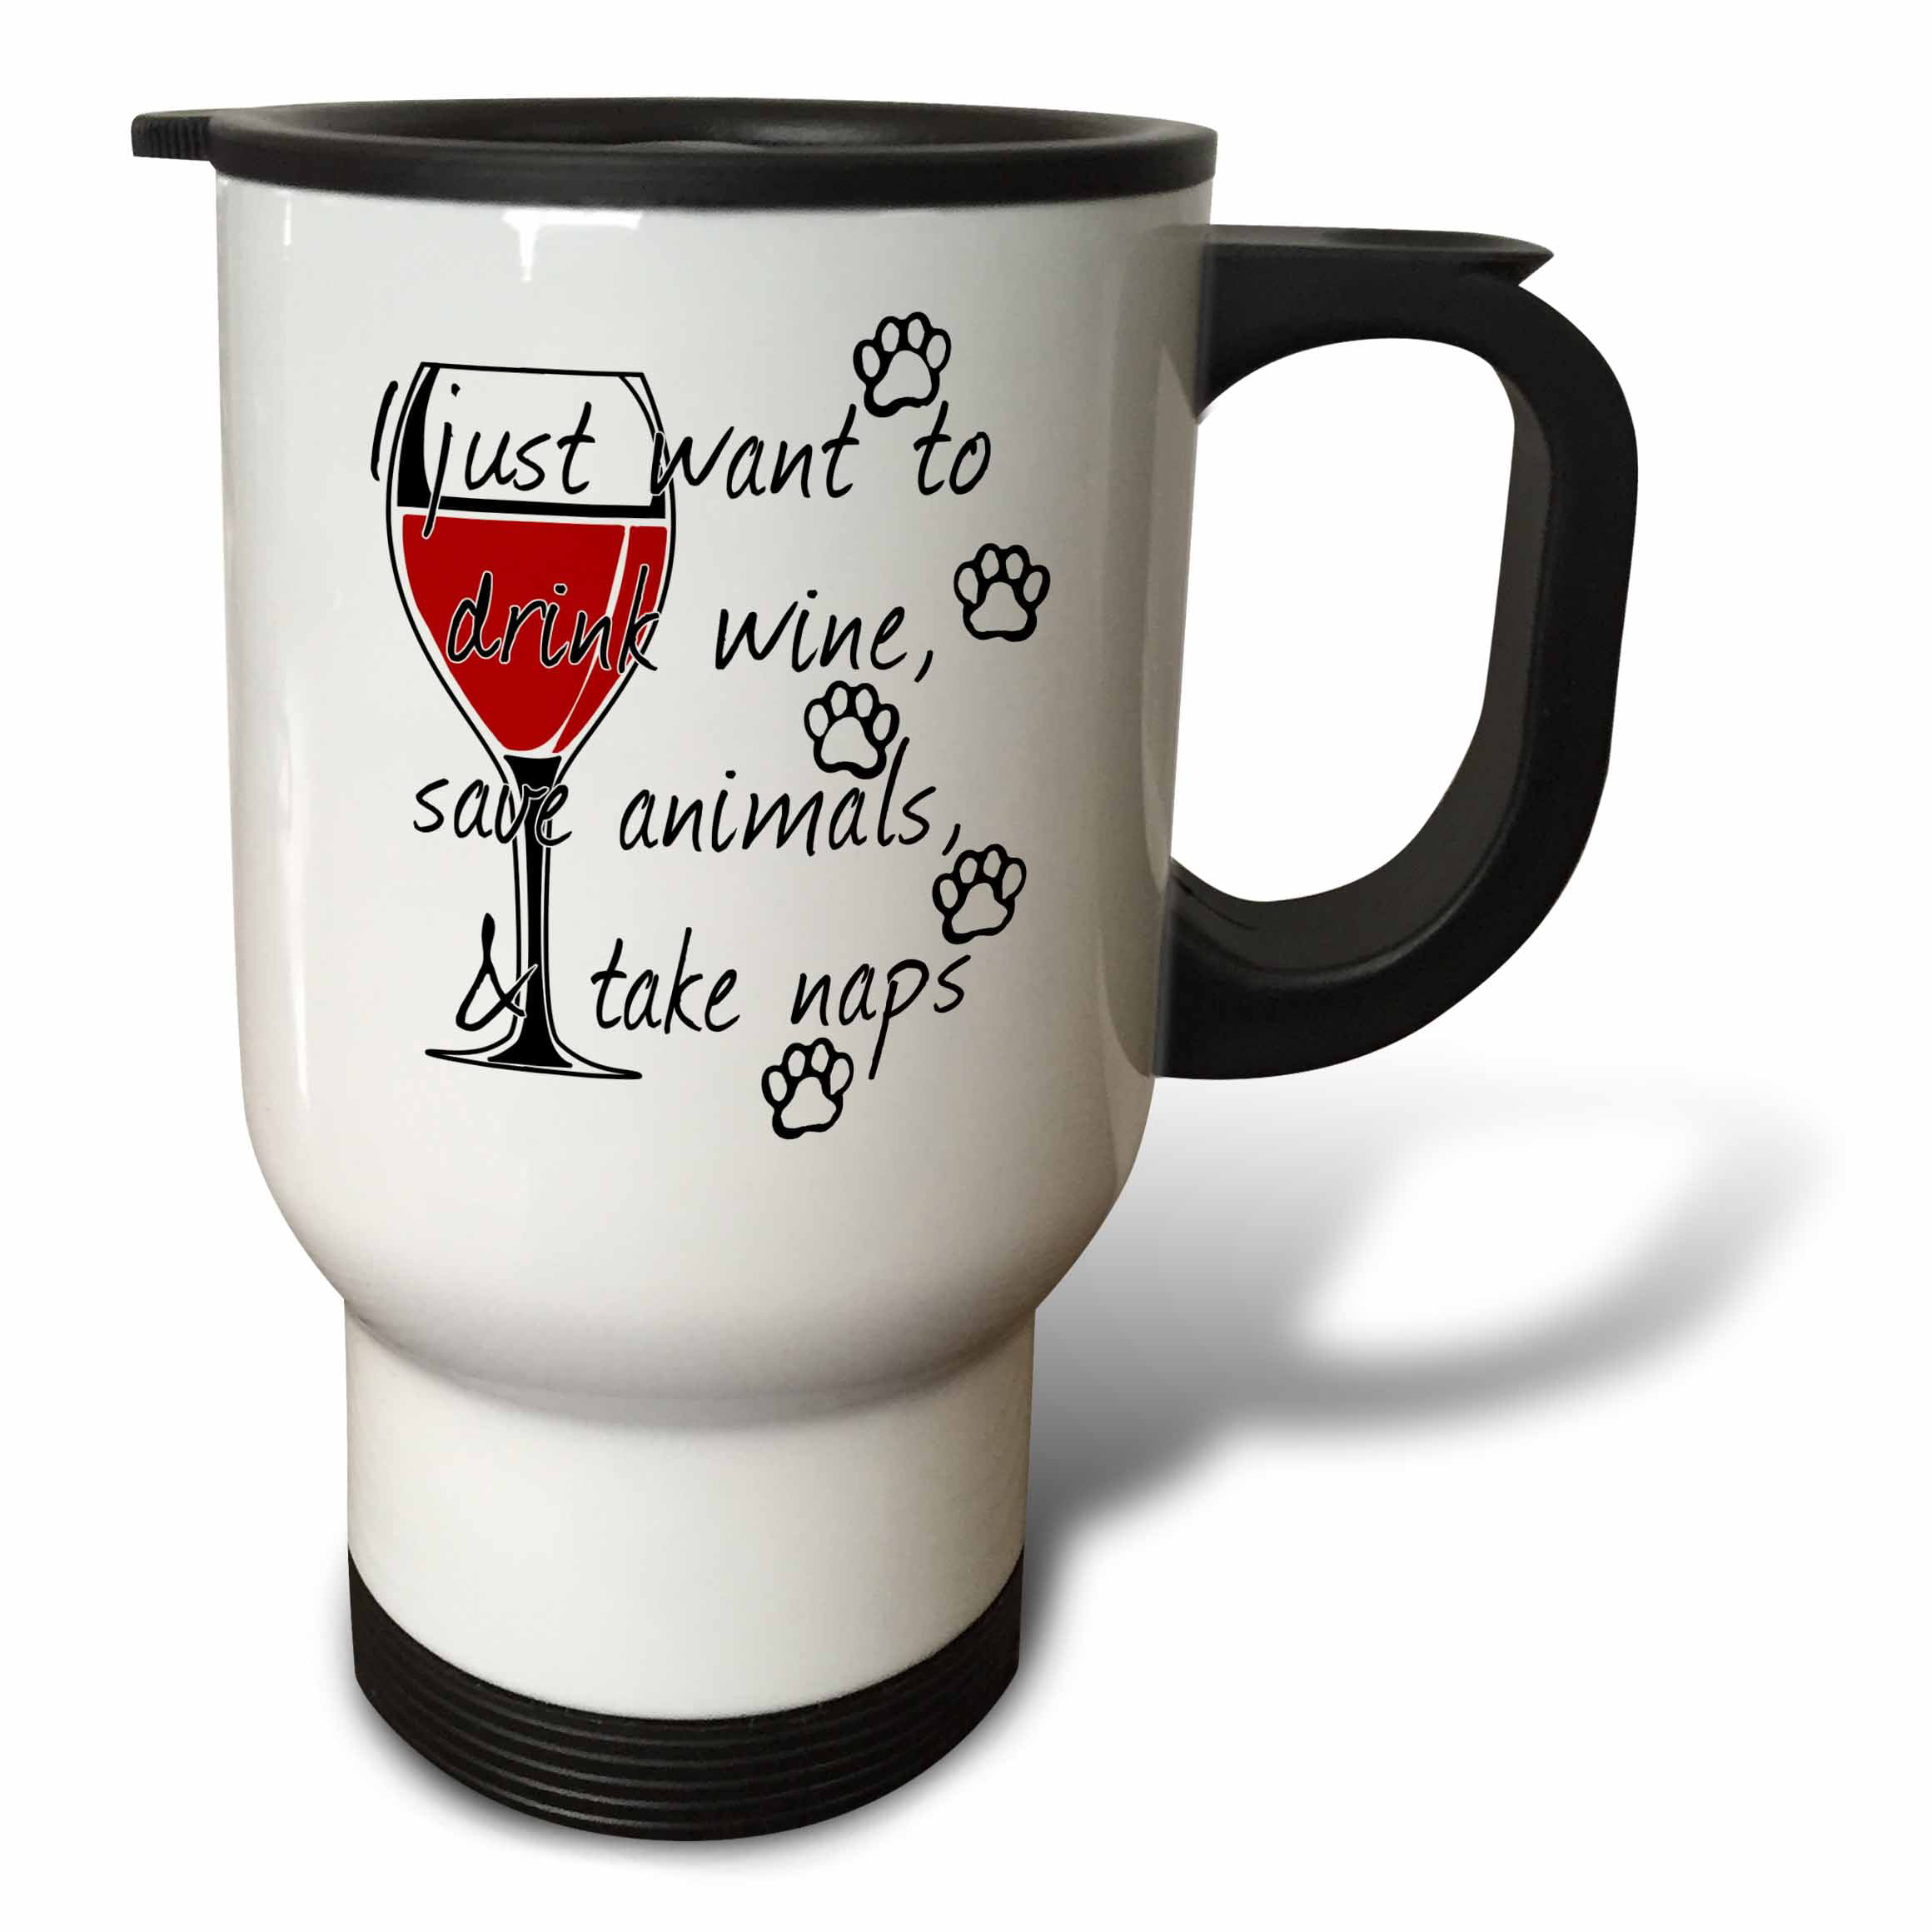 Gift For Cats And Wine Lovers Novelty Coffee Mugs Gift Just Want To Drink Wine Rescue Cats 14 Oz Stainless Steel Travel Coffee Mug W Lid